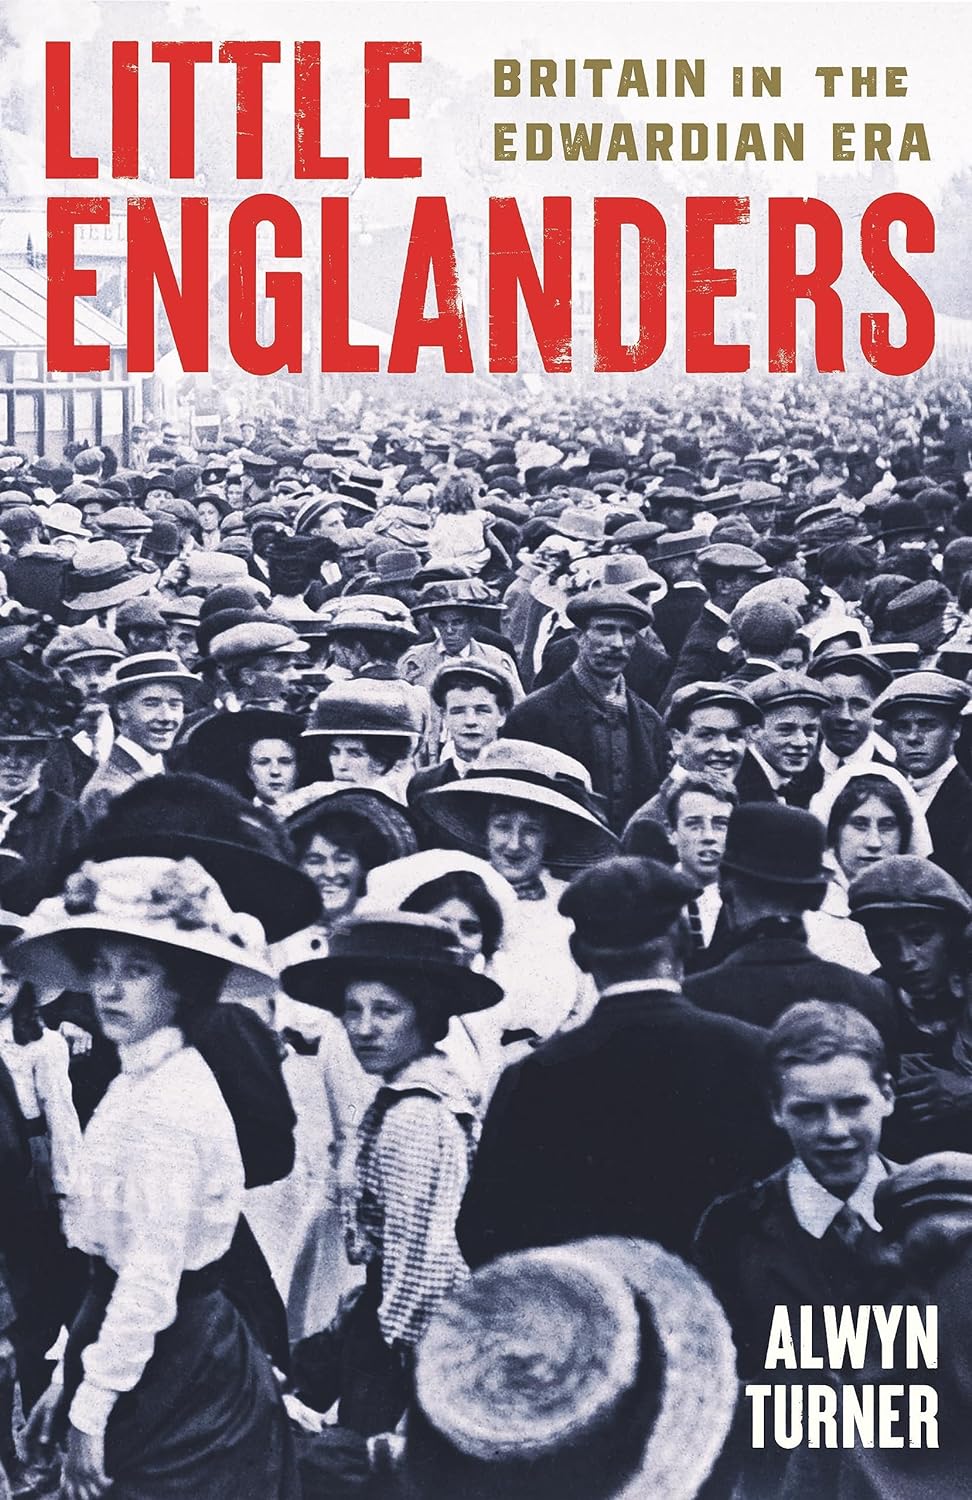 Little_Englanders_book_front_cover